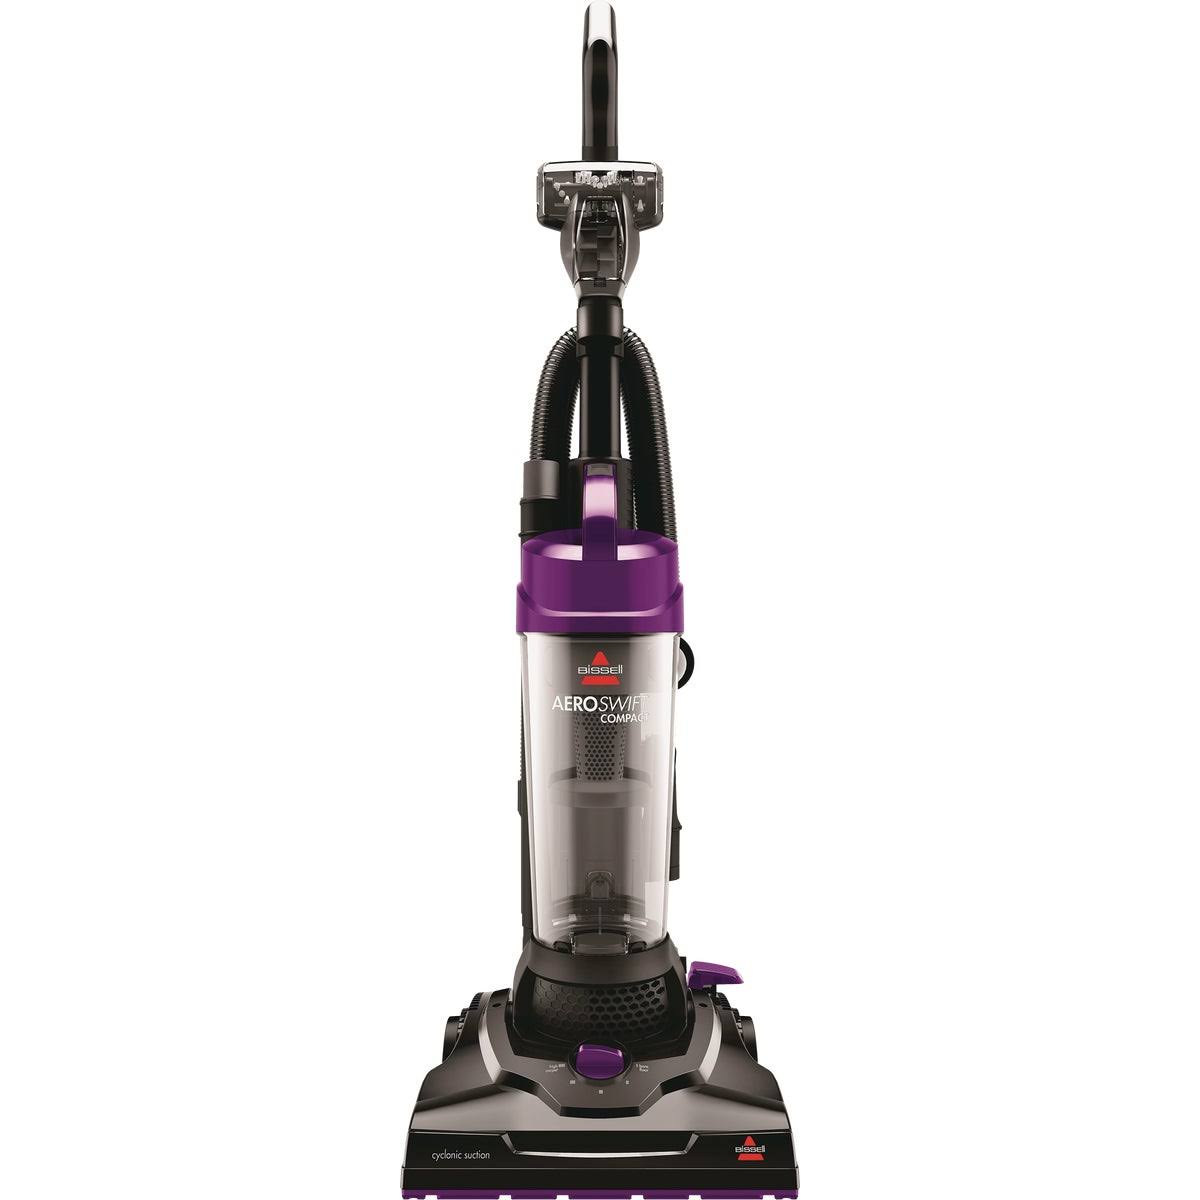 Bissell AeroSwift Compact Upright Vacuum (2612)